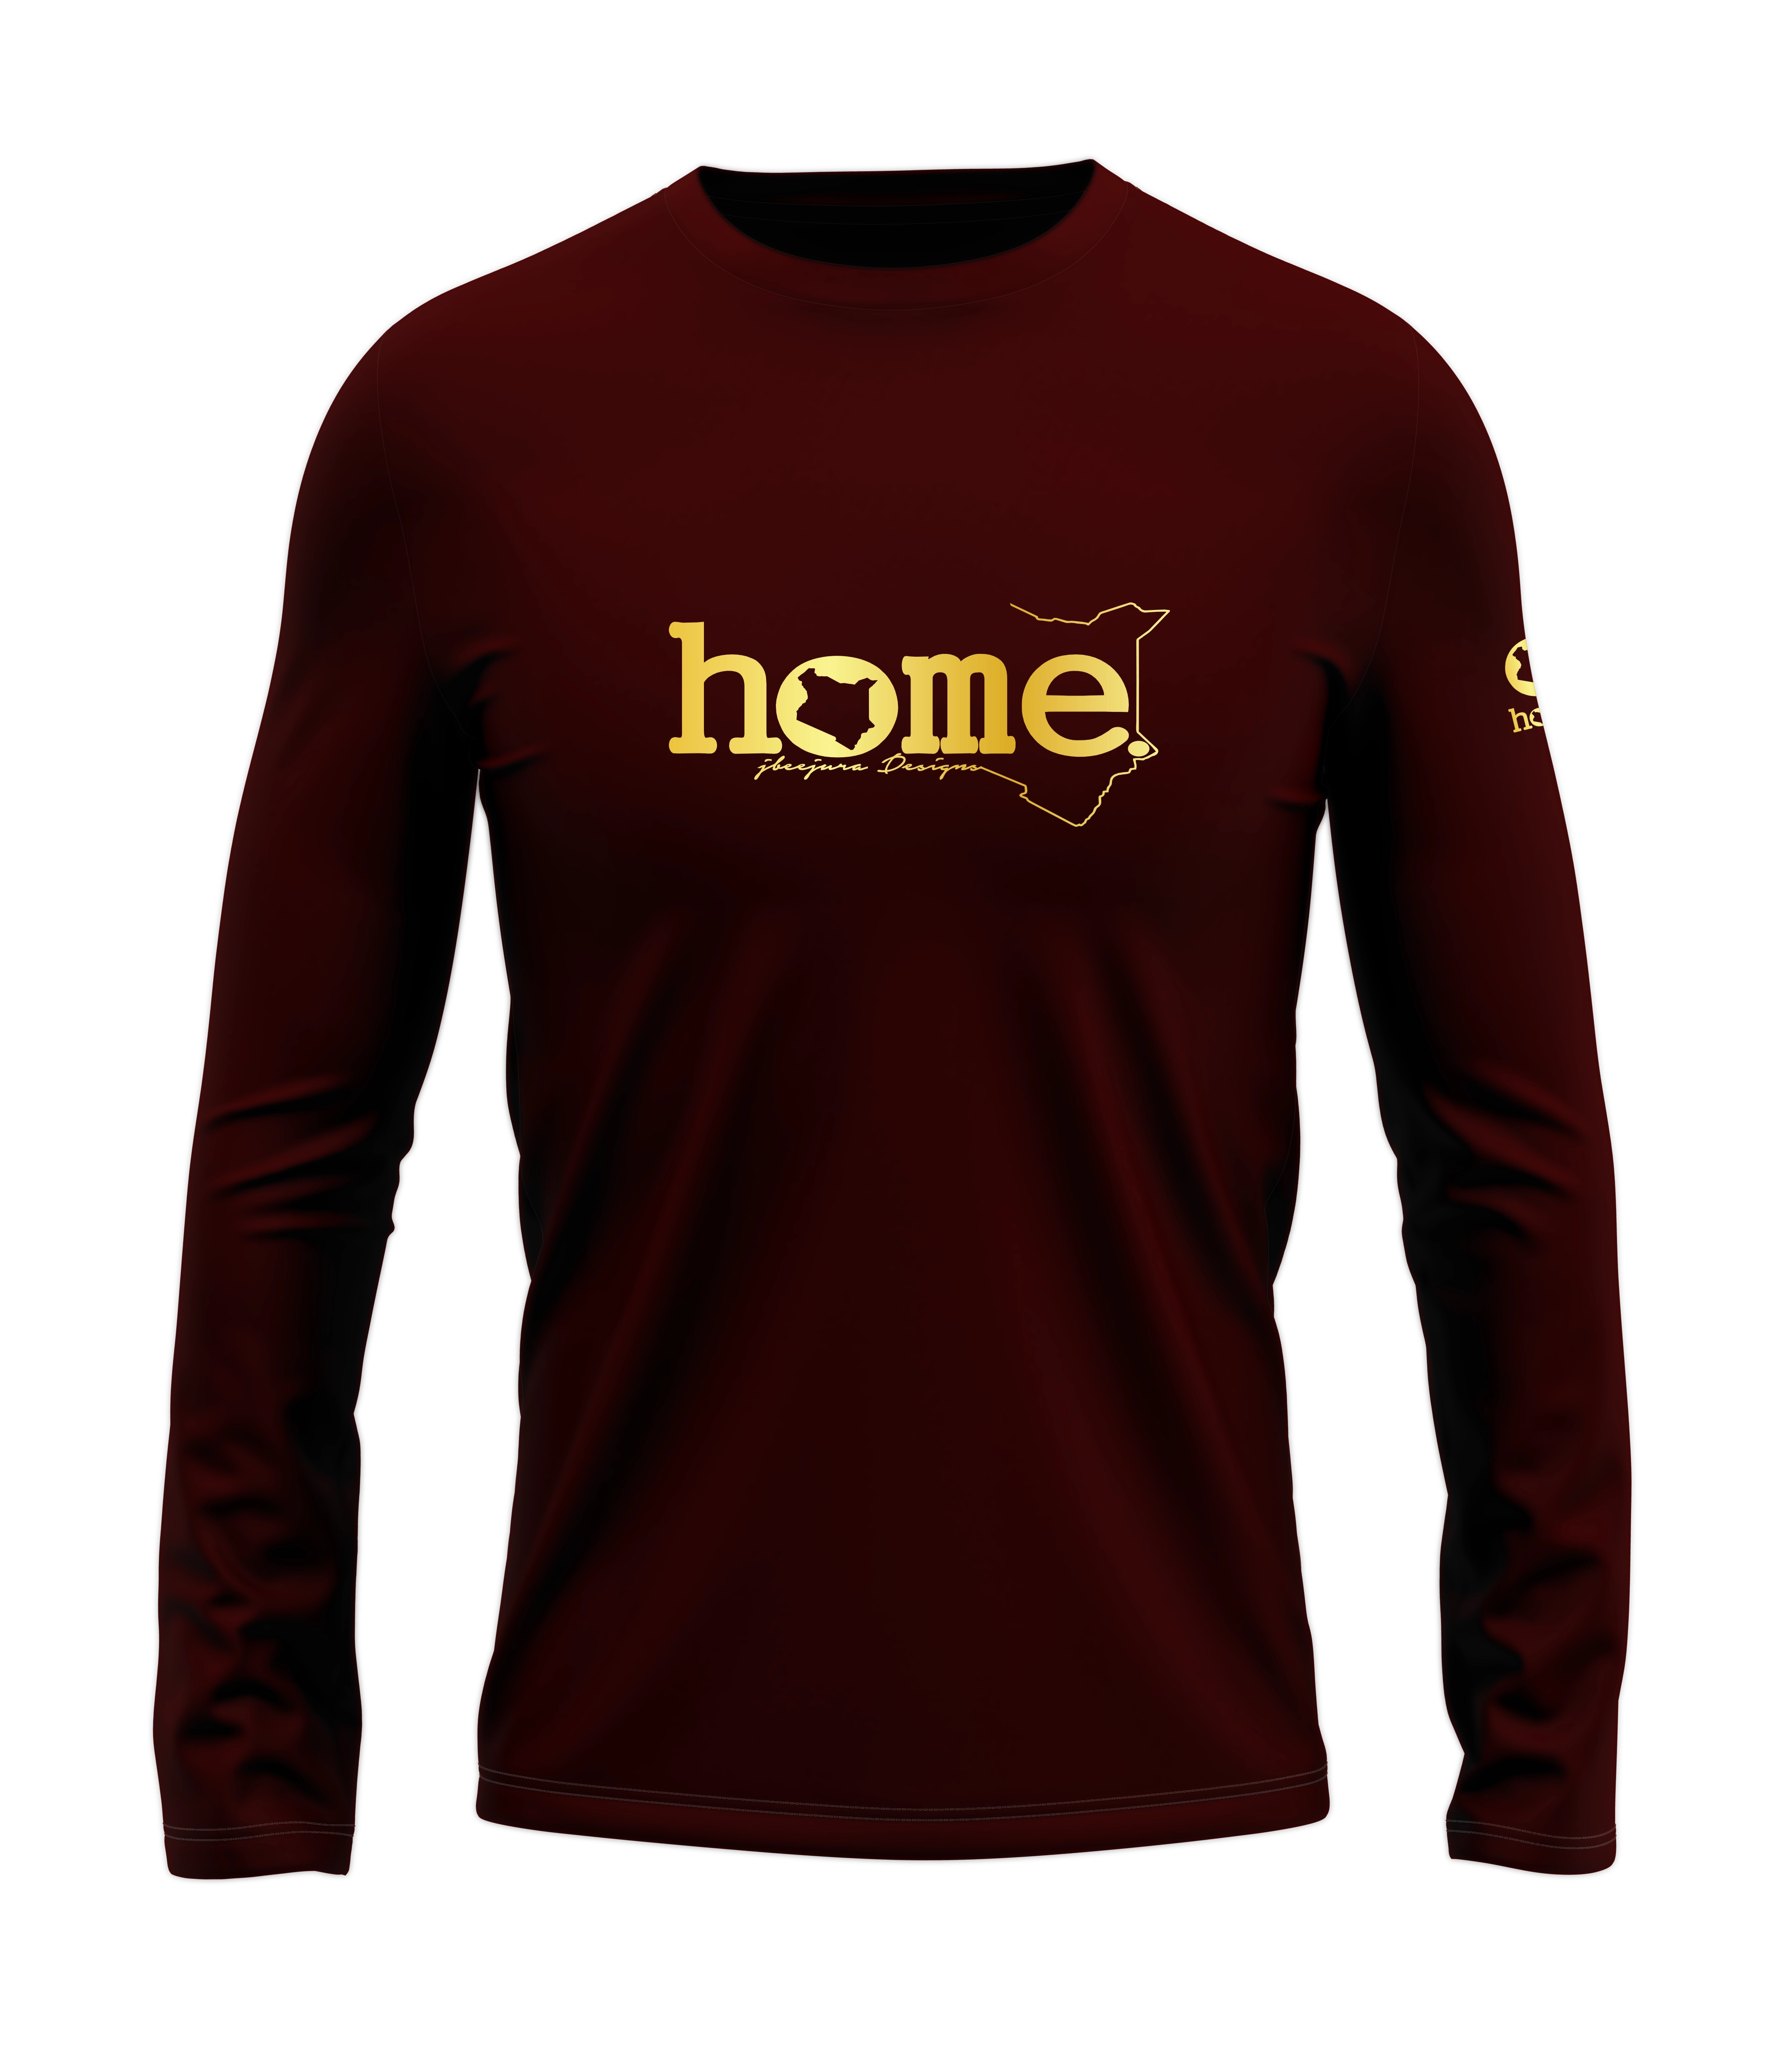 home_254 LONG-SLEEVED MAROON T-SHIRT WITH A GOLD CLASSIC WORDS PRINT – COTTON PLUS FABRIC